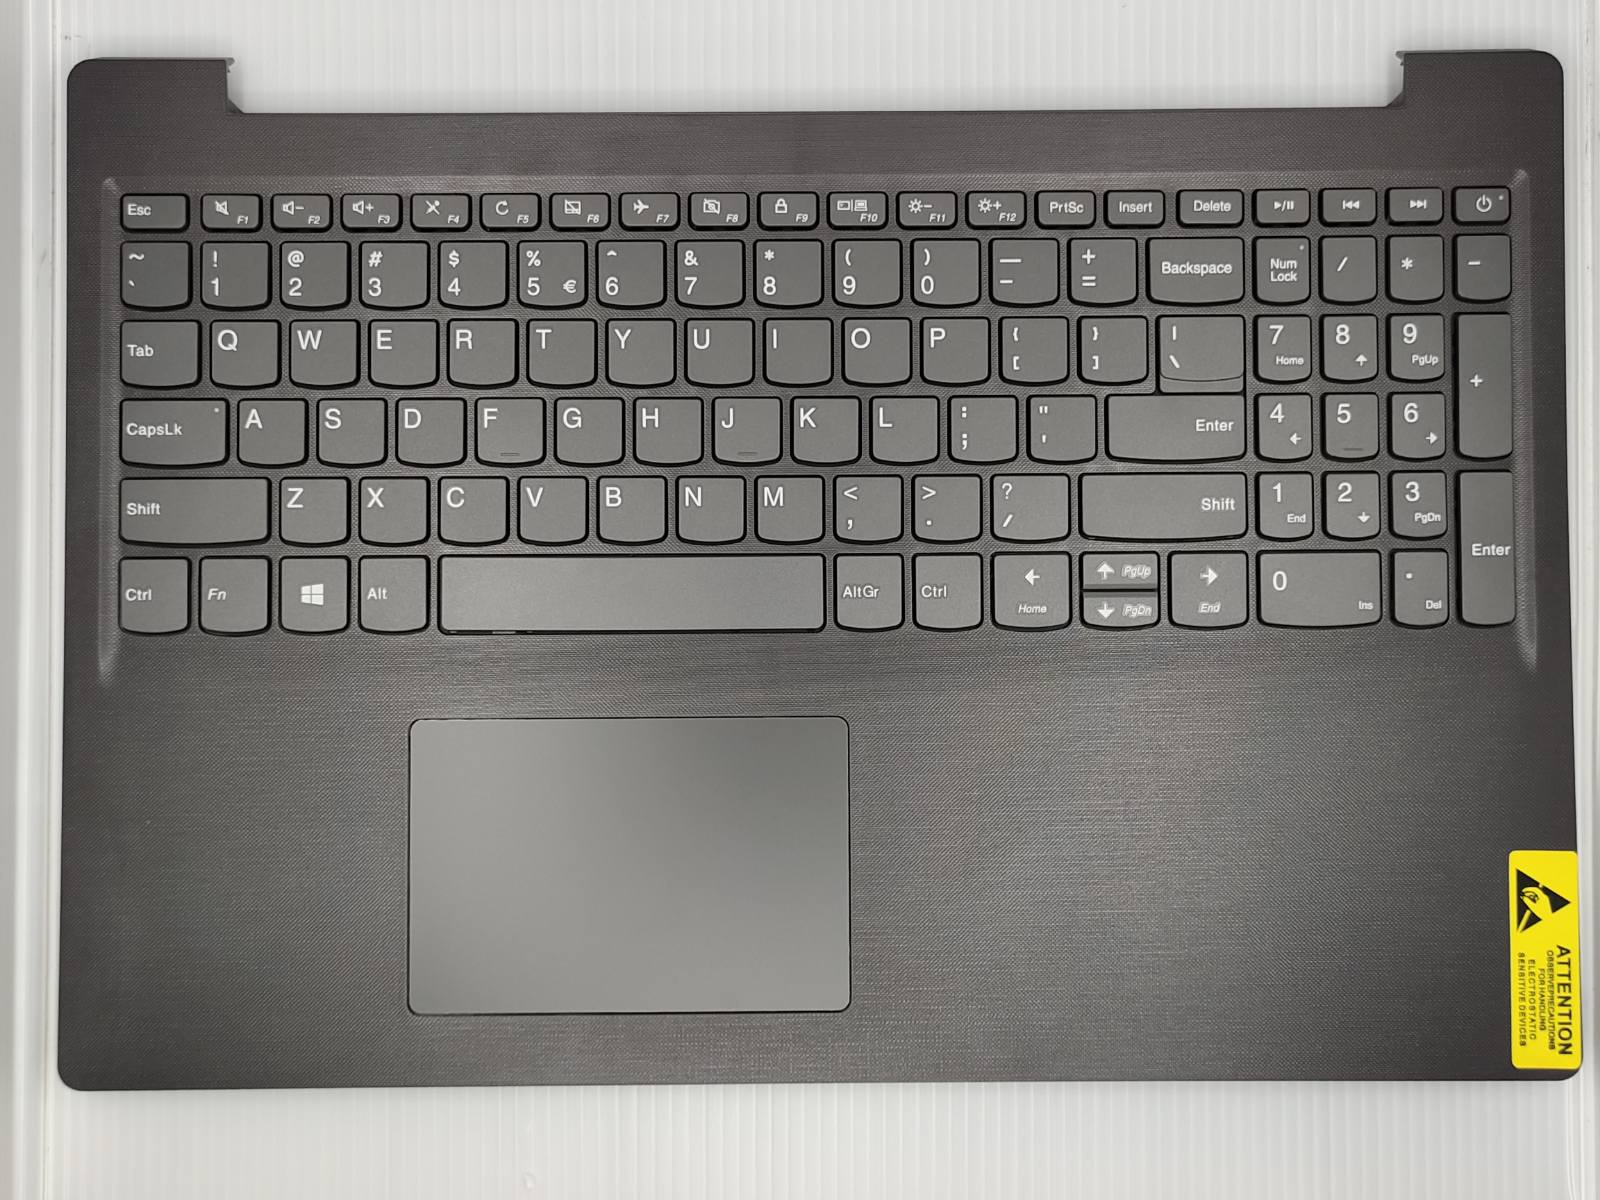 Replacement Keyboard for Lenovo S145-15IIL WL